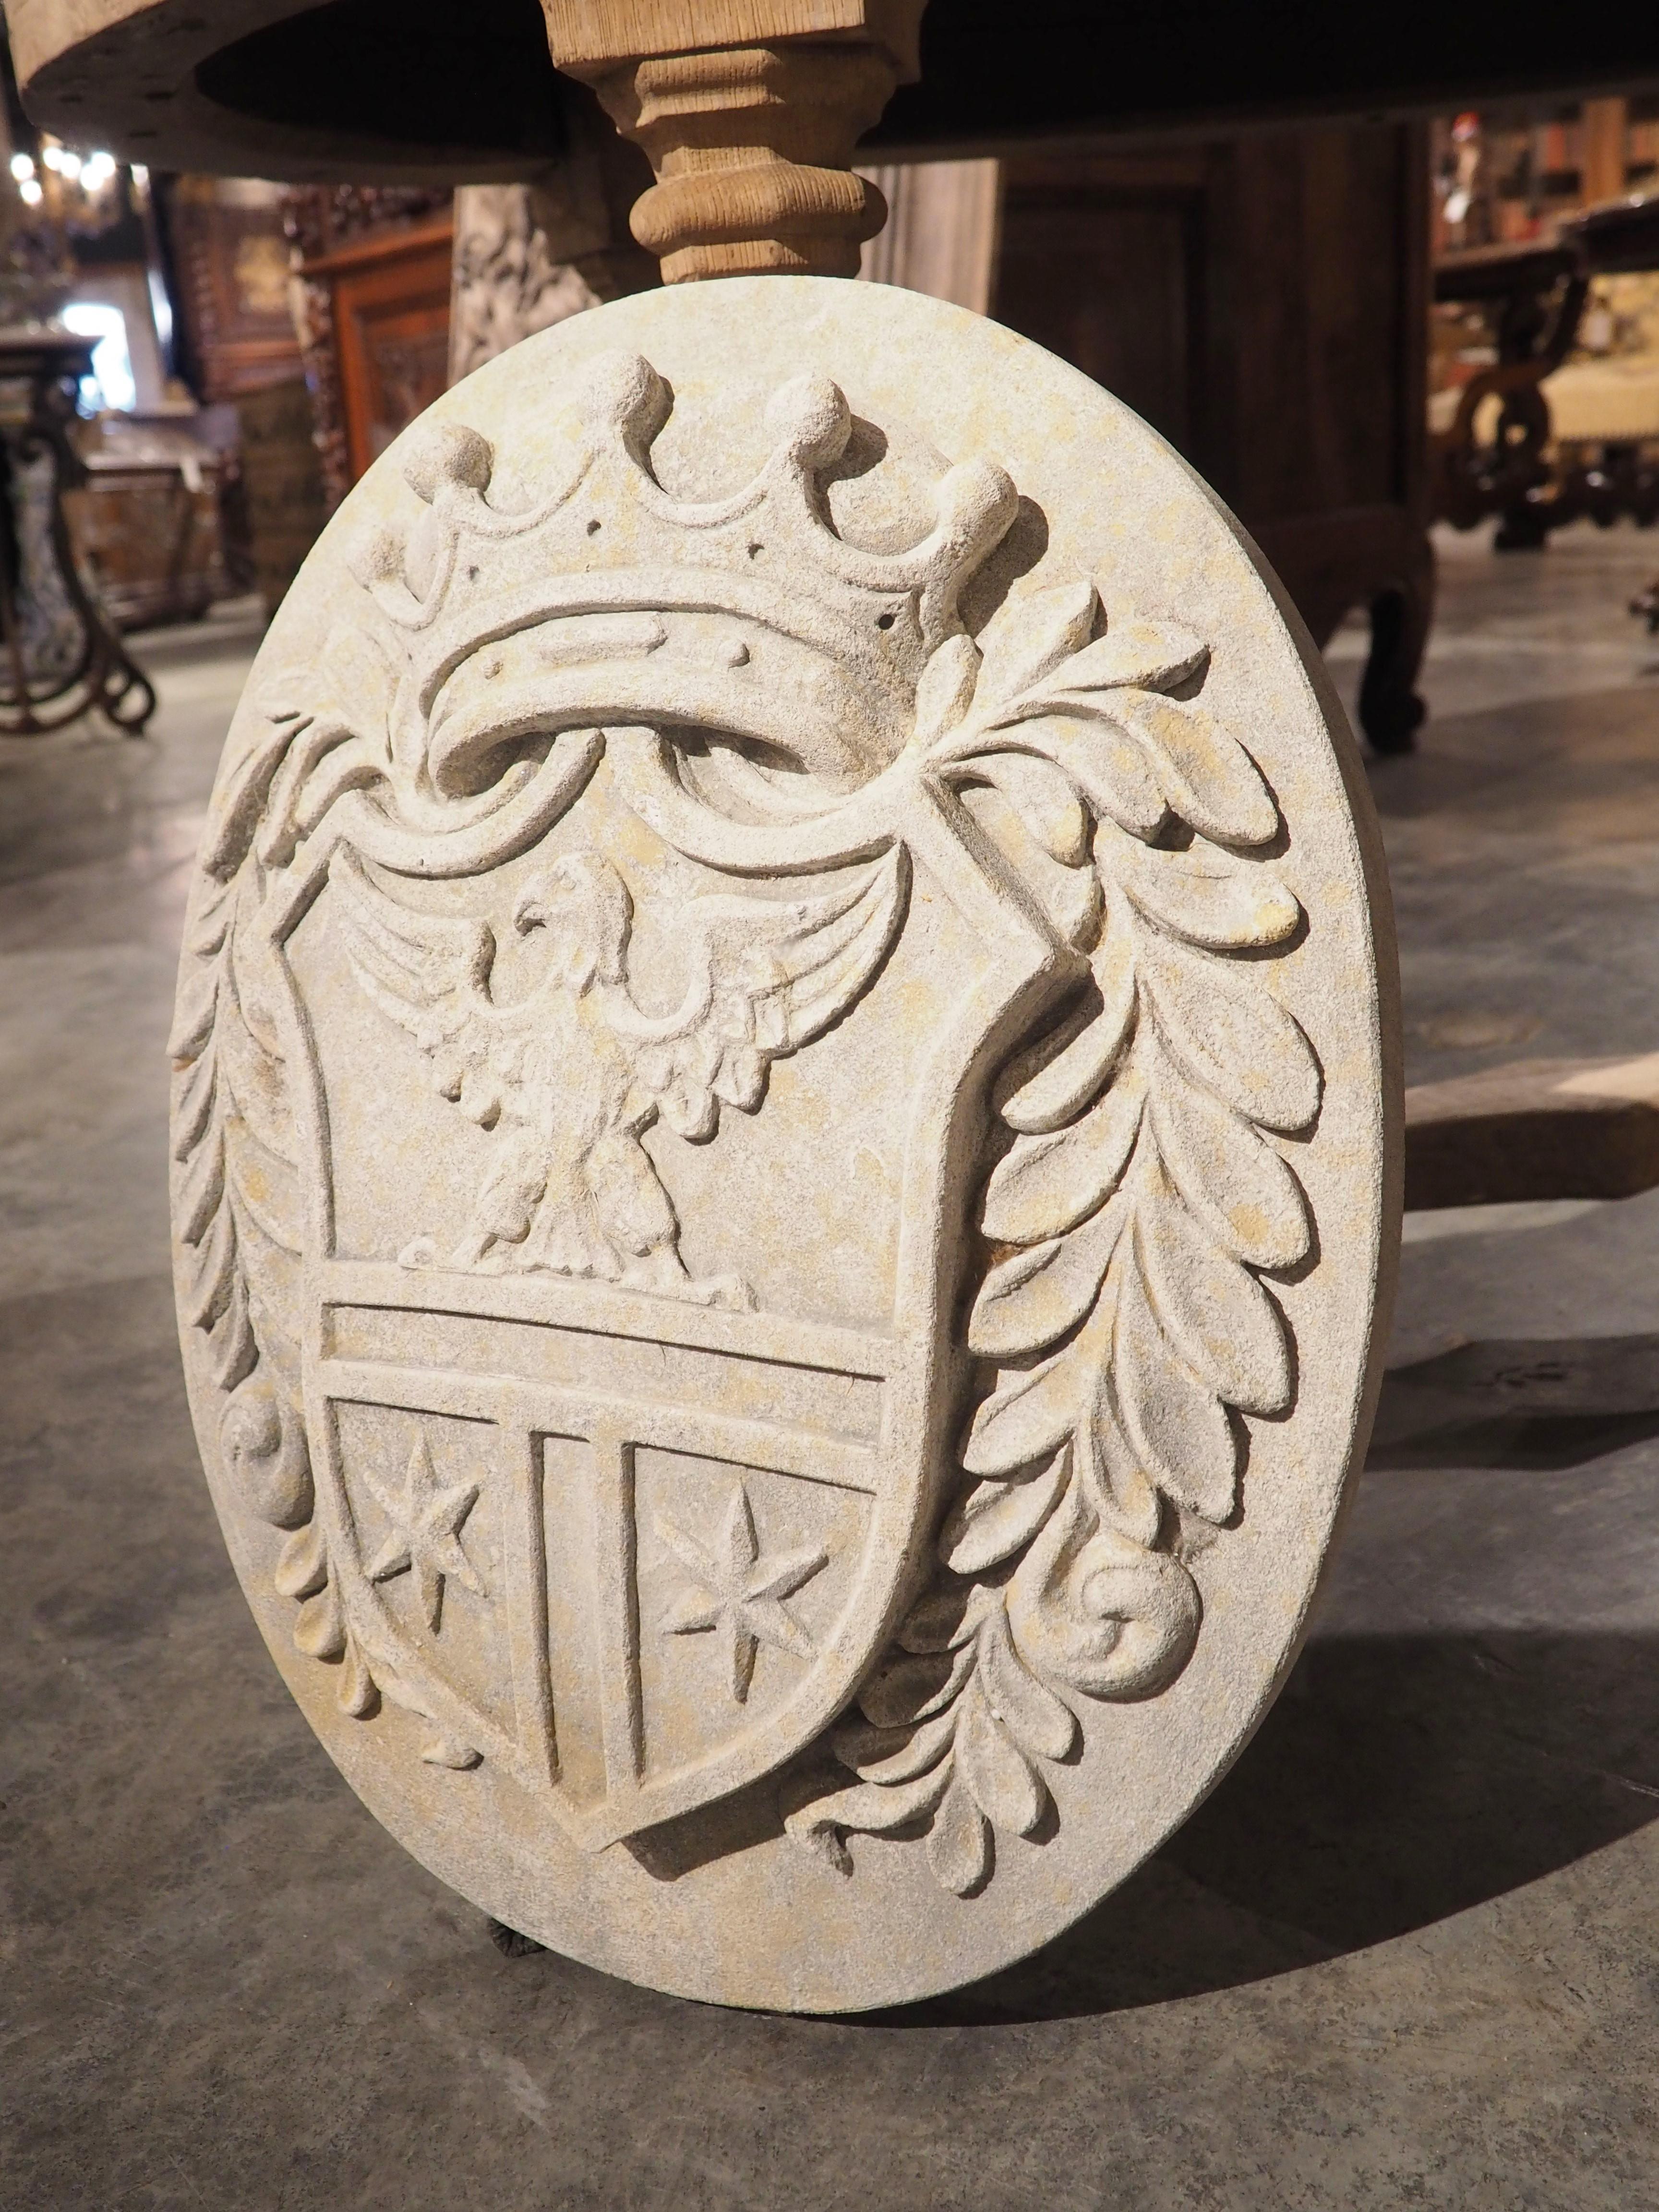 Hand-carved from Italian limestone, this coat of arms plaque with crown and eagle features both bas- and mid-relief motifs. Bas-relief is a sculpture technique where raised carvings have a shallow profile, while mid-relief ones have slightly more